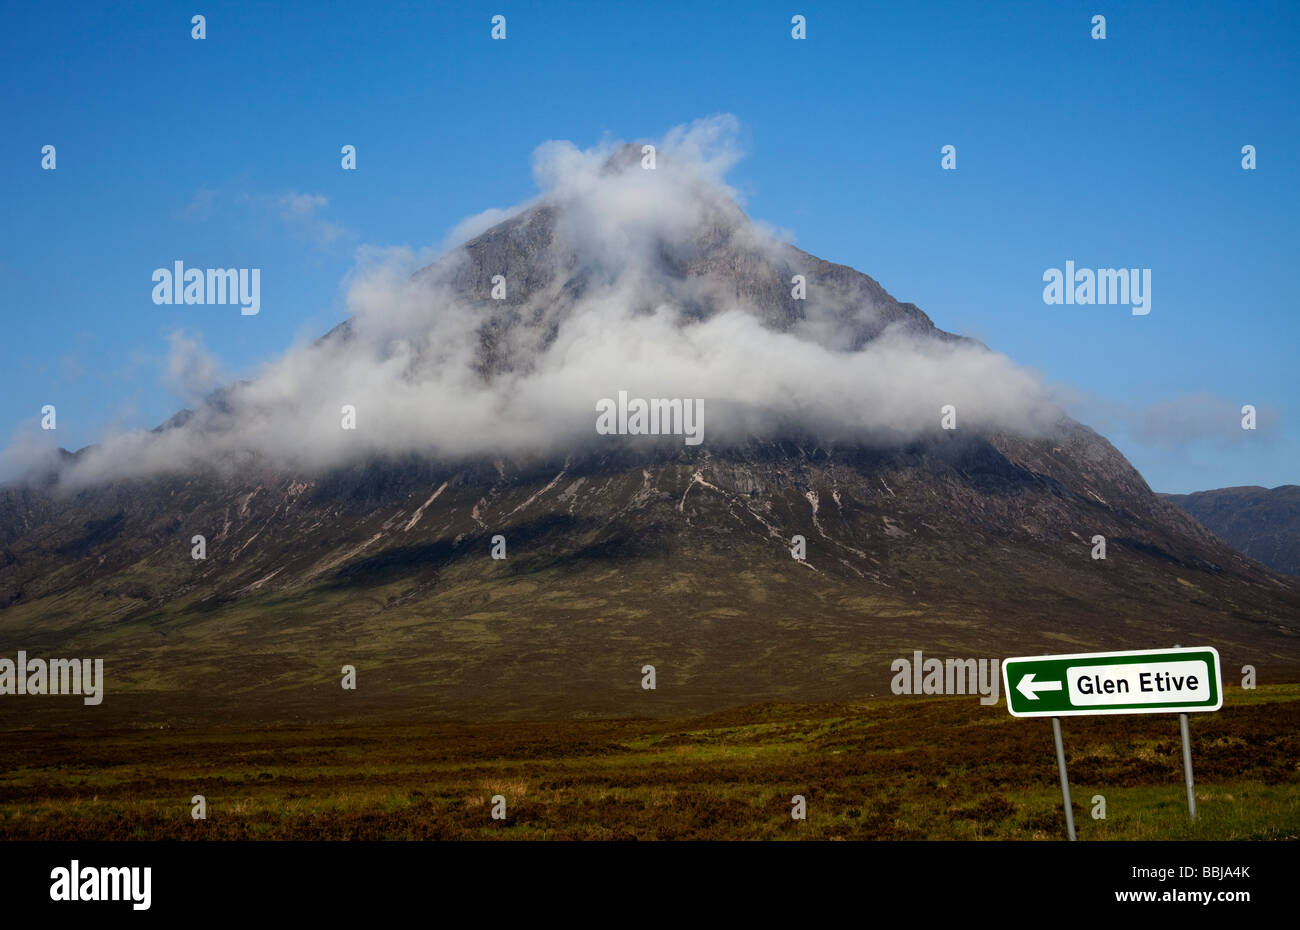 Buachaille Etive Mor mountain shrouded in mist with Glen Etive signpost in foreground, Lochaber Scotland, UK, Europe Stock Photo